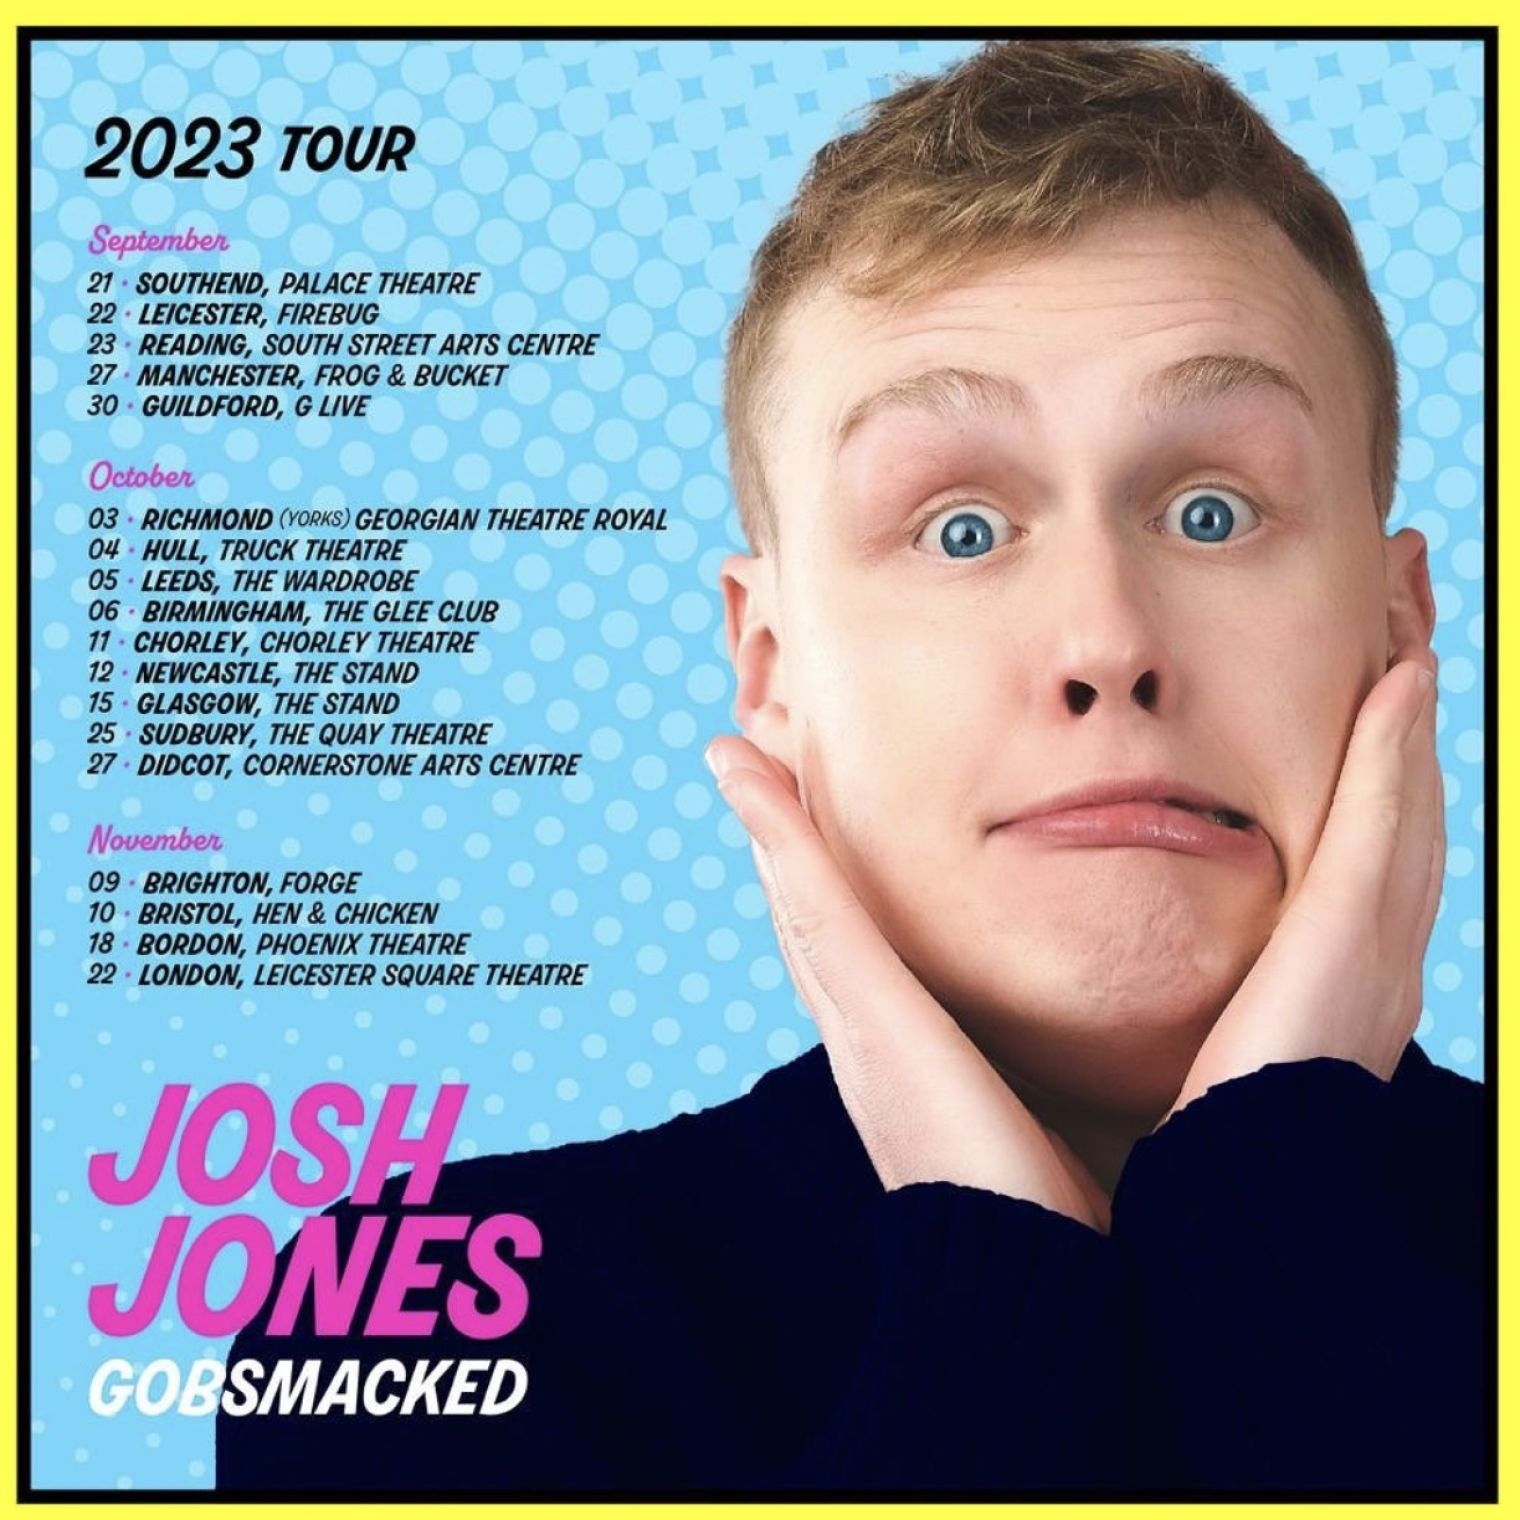  Josh Jones will be touring the UK this autumn with his new show ‘Gobsmacked’